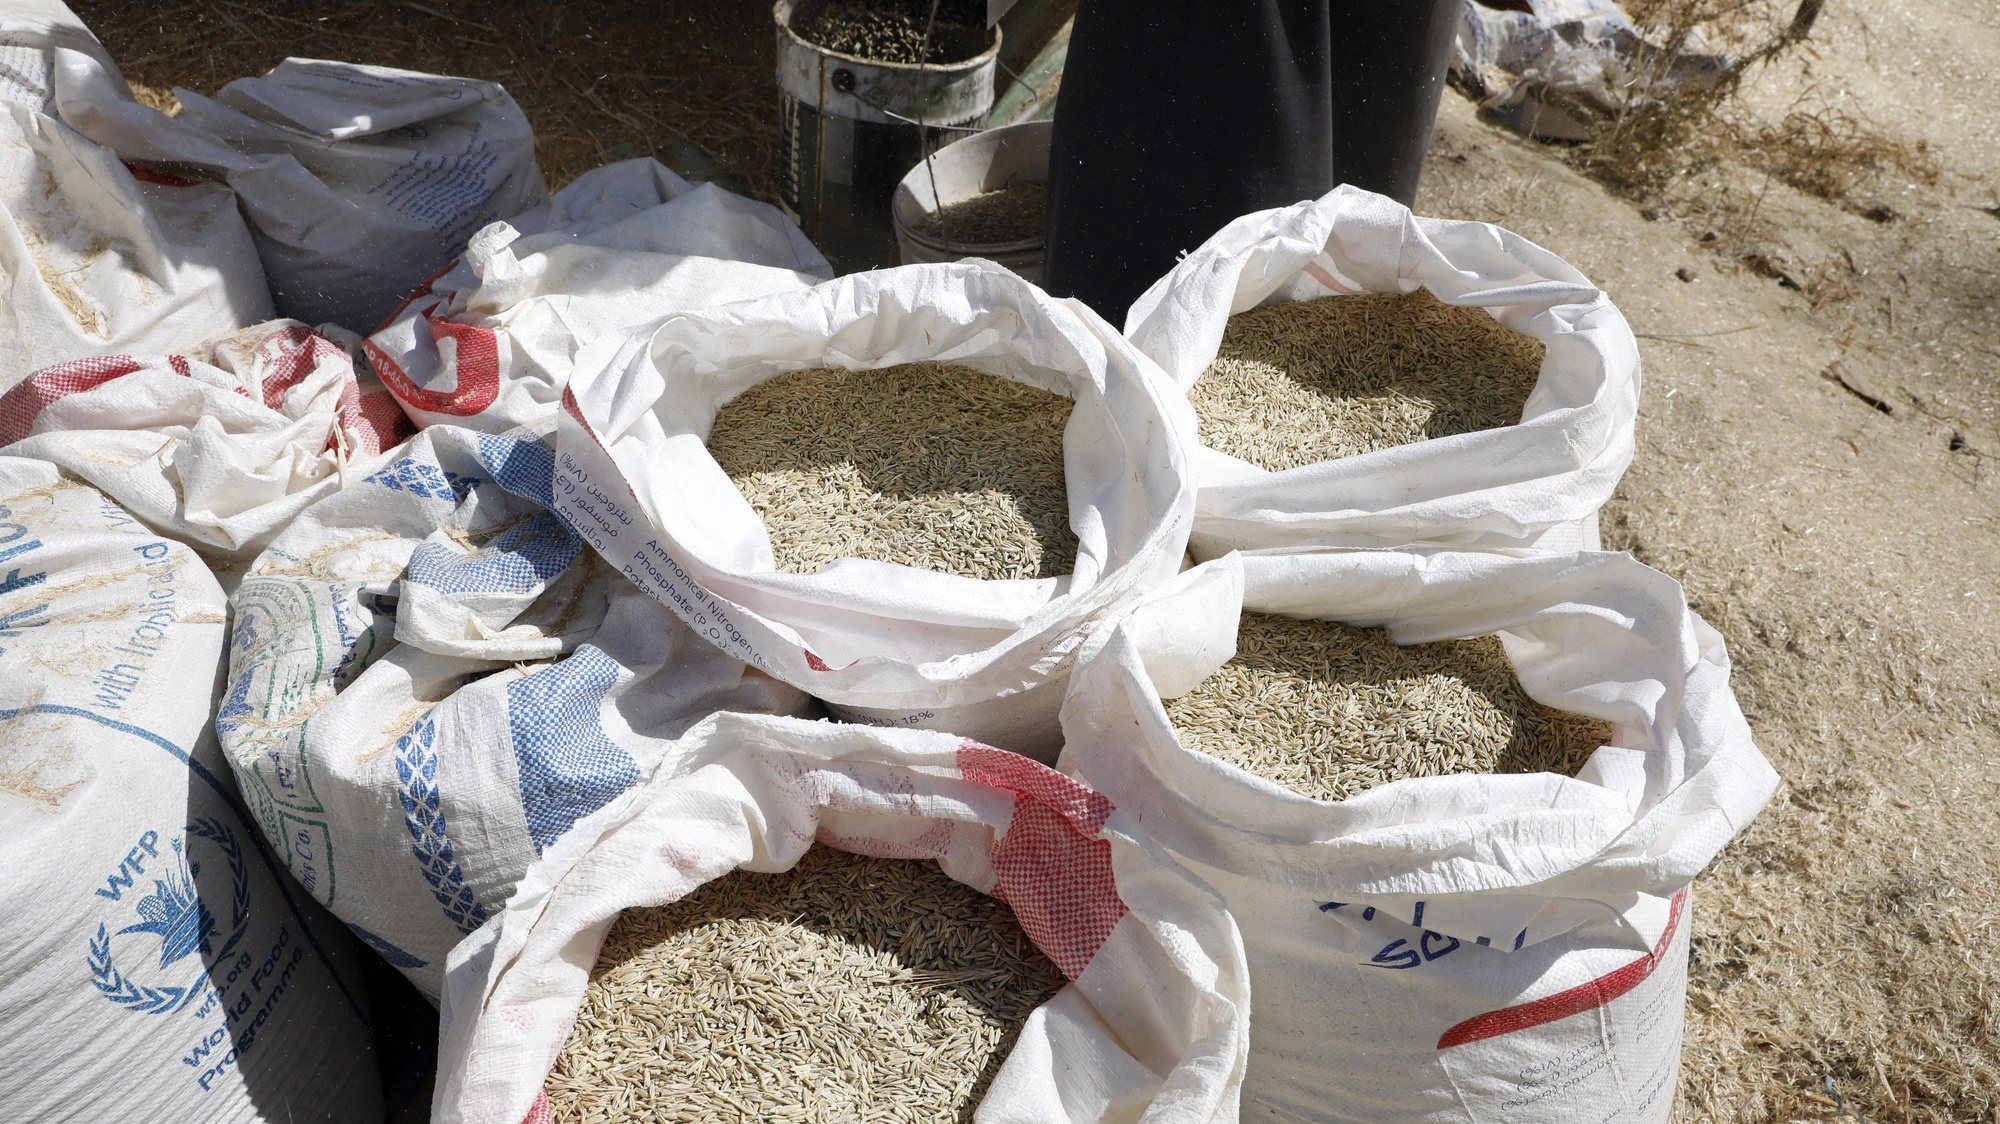 epa10365512 Wheat grains are being collected in sacks after being separated from the straw by a threshing machine during a harvest season at a field in Sana&#039;a, Yemen, 14 December 2022. The World Bank has provided an additional 150 million US dollar to boost local food production and provide emergency assistance to smallholder farmers and vulnerable households in conflict-ravaged Yemen, the Food and Agriculture Organization (FAO) reported. Yemen has suffered from the effects of the war in Ukraine which disrupted shipments of wheat thus further weakening the food security situation in the Arab country. Yemenâ€™s total wheat production contributes less than 10 percent of all utilization needs due to the effects of the prolonged conflict as well as poor water management and high fuel prices. Yemen is experiencing one of the worst humanitarian crisis in the world with approximately 23.4 million people out of its 30-million population depend on humanitarian assistance to survive due to eight years of devastating conflict, according to estimates by UN relief agencies.  EPA/YAHYA ARHAB